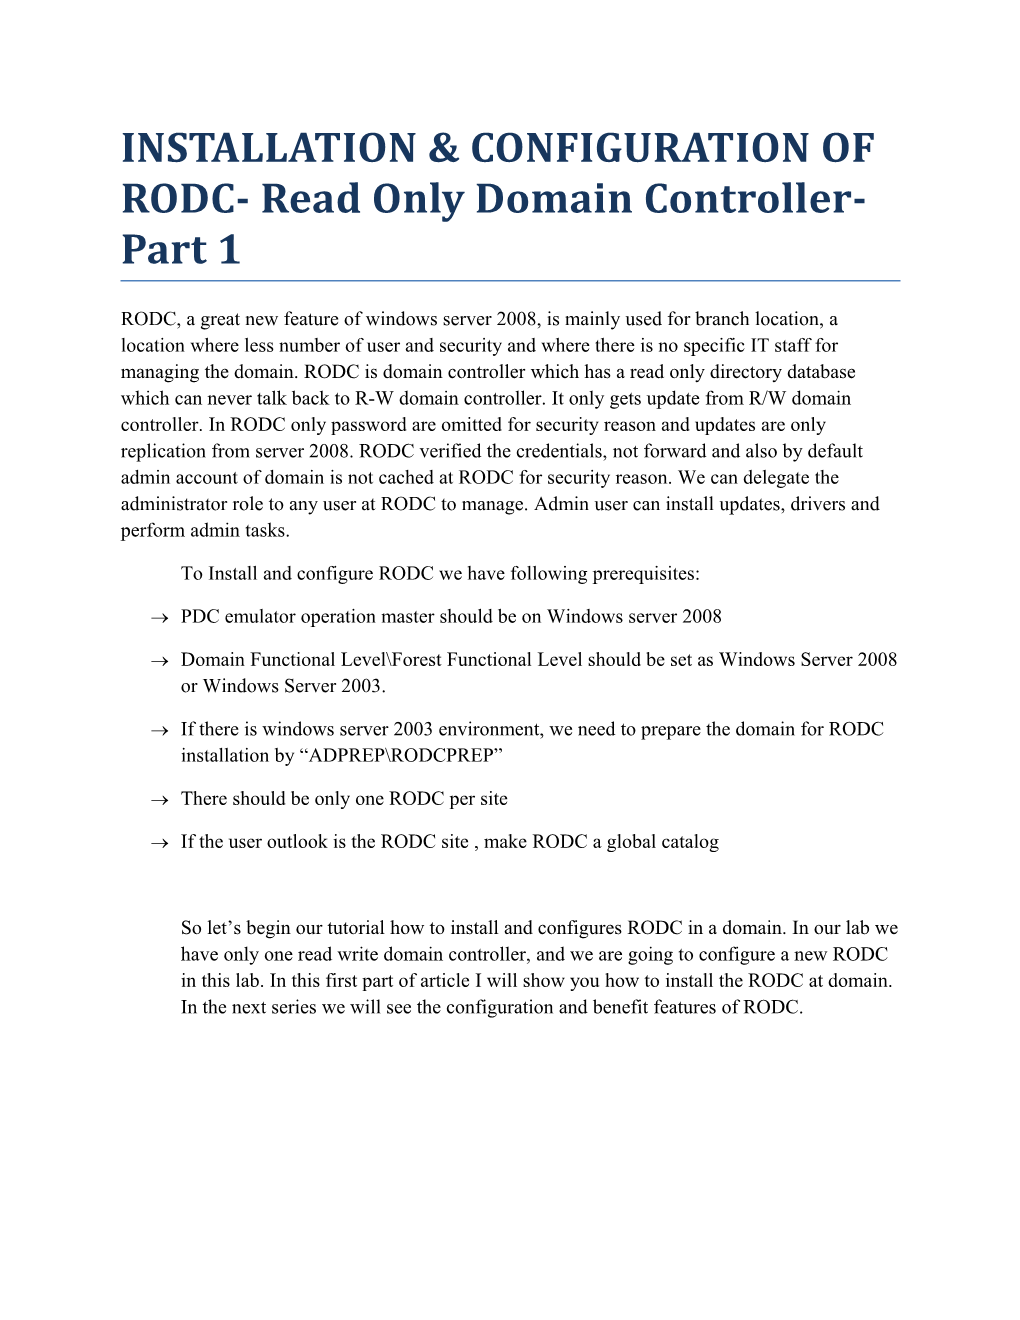 INSTALLATION & CONFIGURATION of RODC- Read Only Domain Controller- Part 1